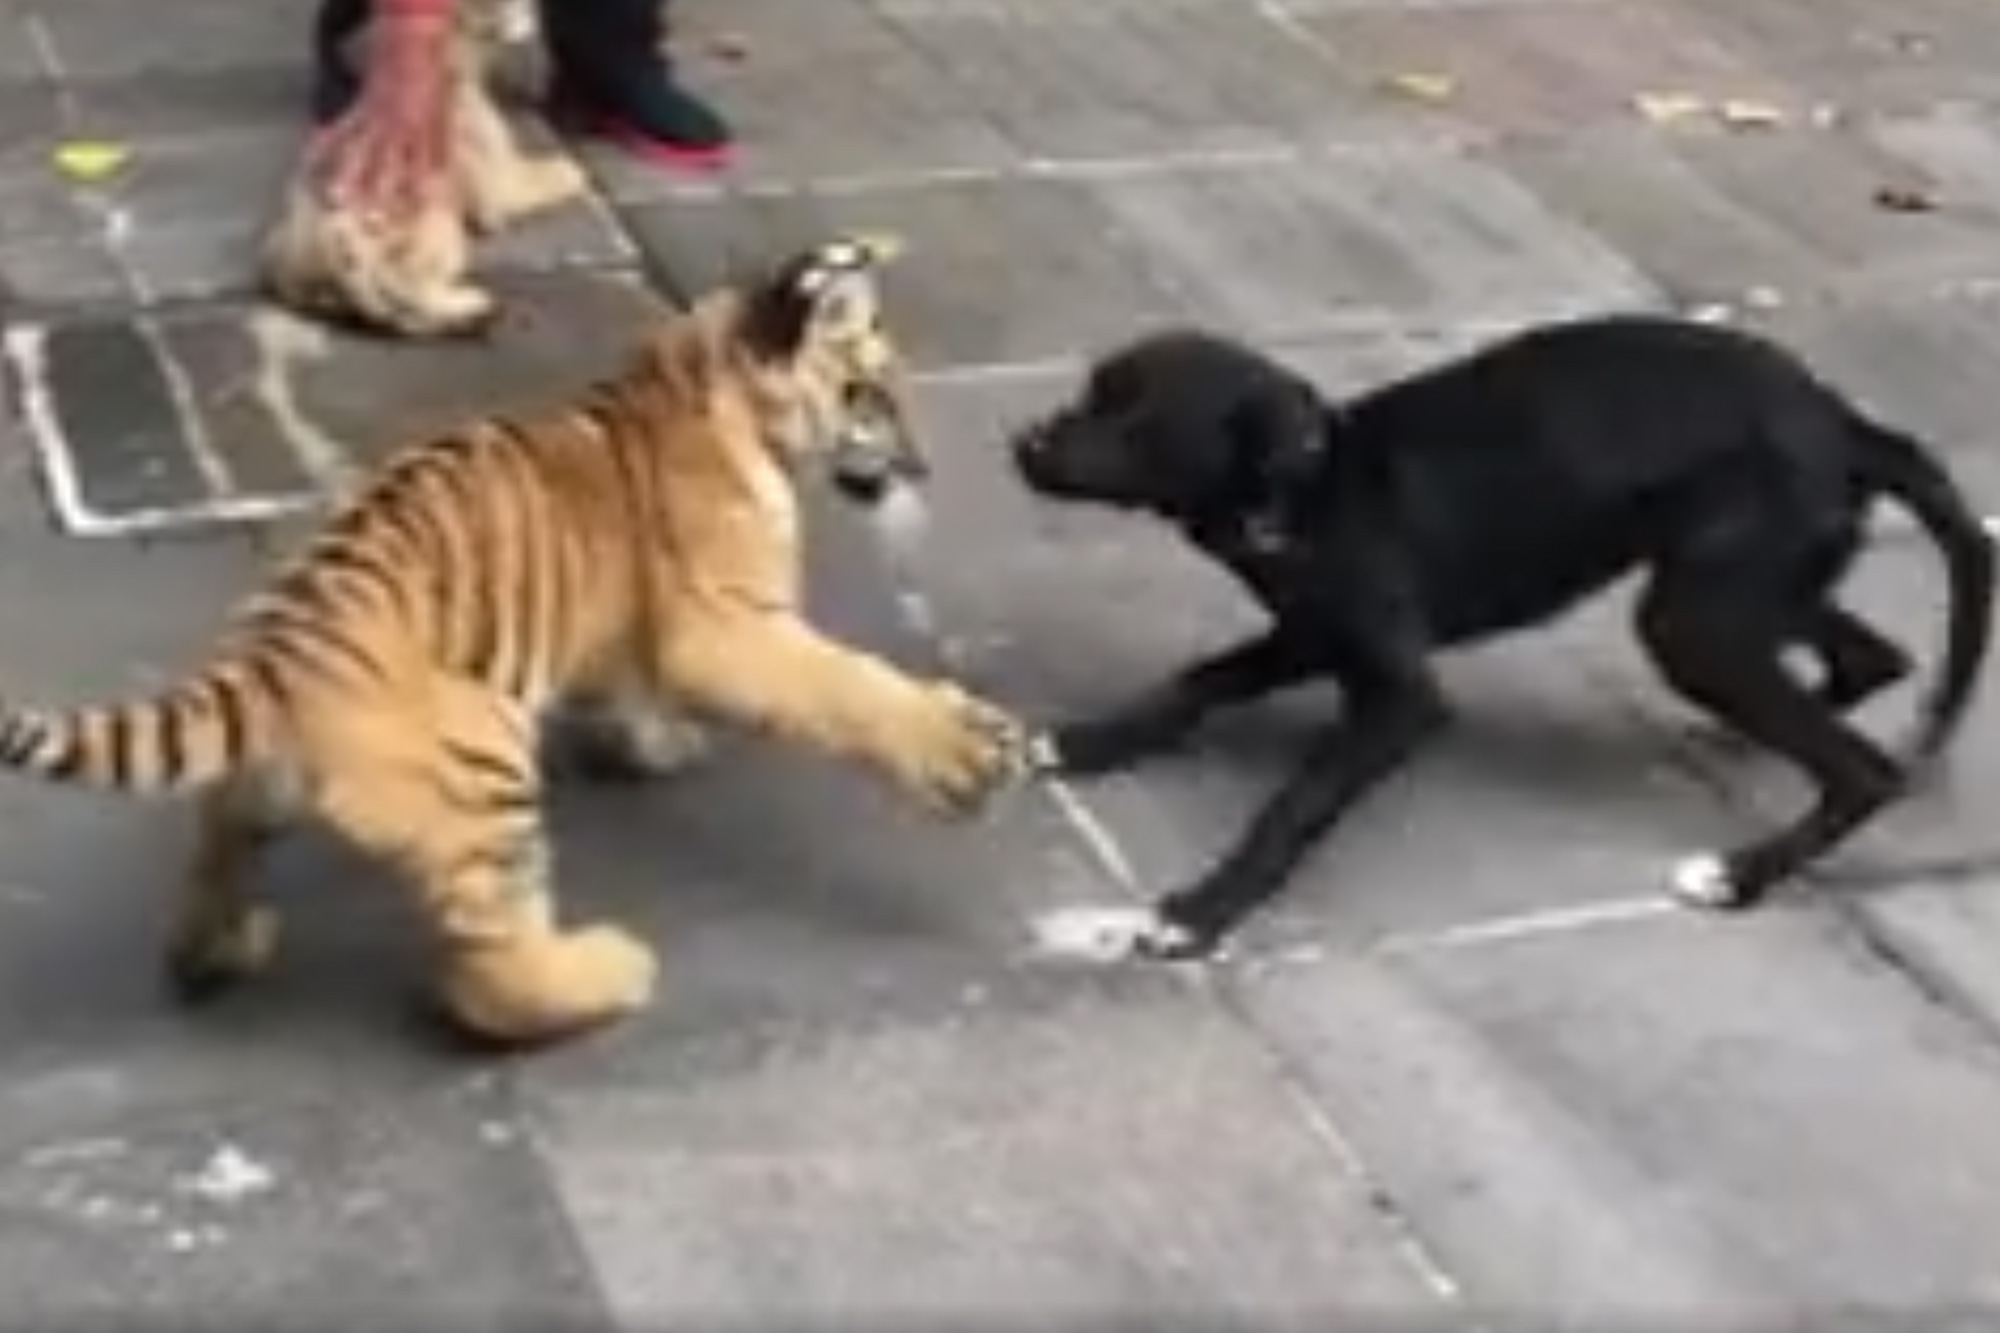 What Transpires at a Tiger Cub and Rescue Dog Playdate | PEOPLE.com